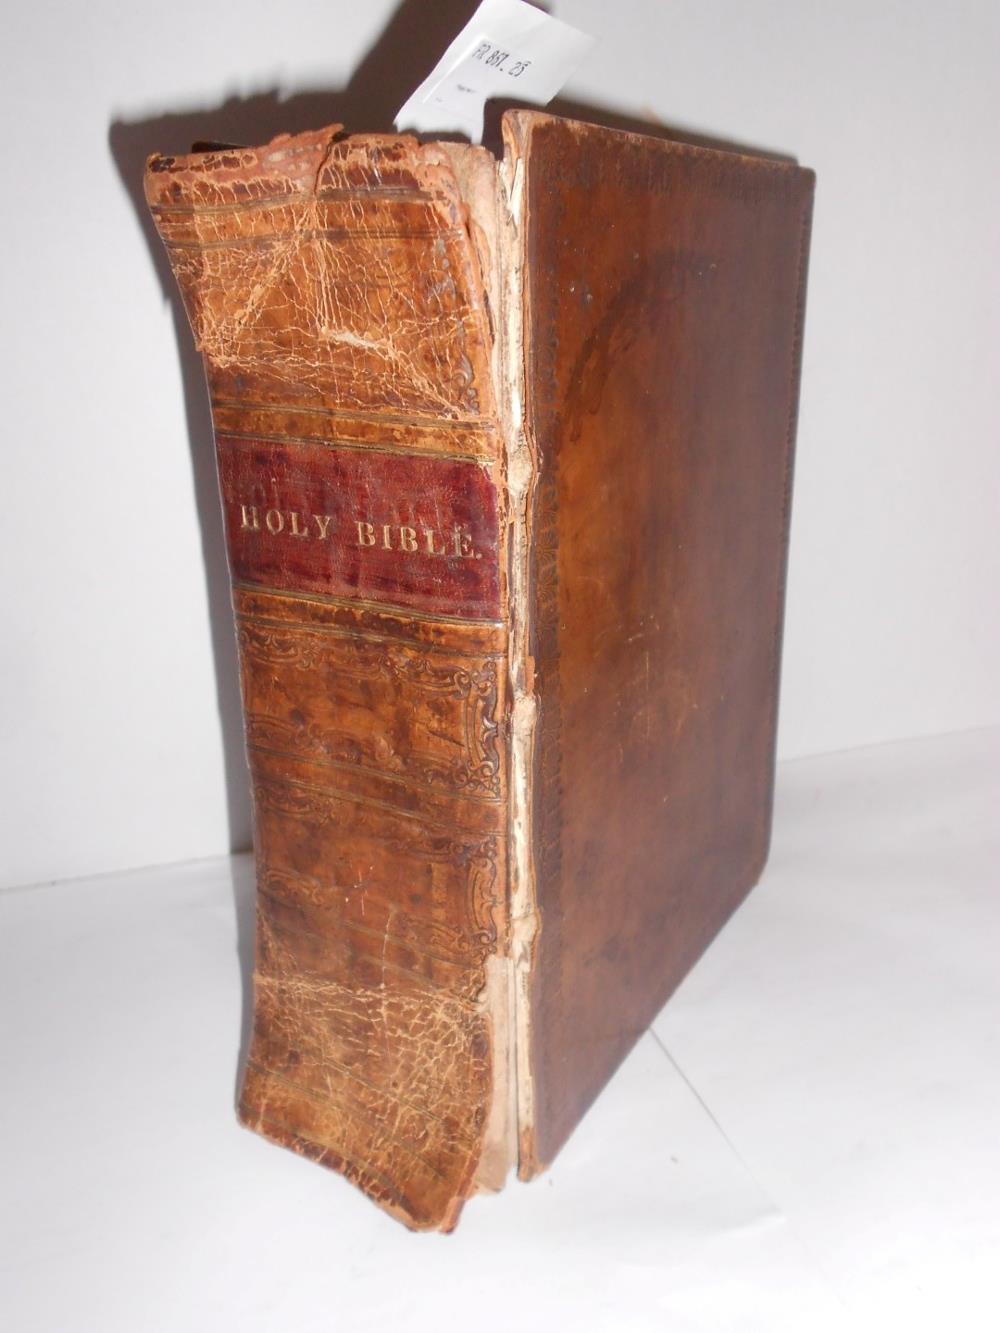 Bible, John Field, London 1648, small 4to, engraved title damaged, bound with Genealogies, 1638,